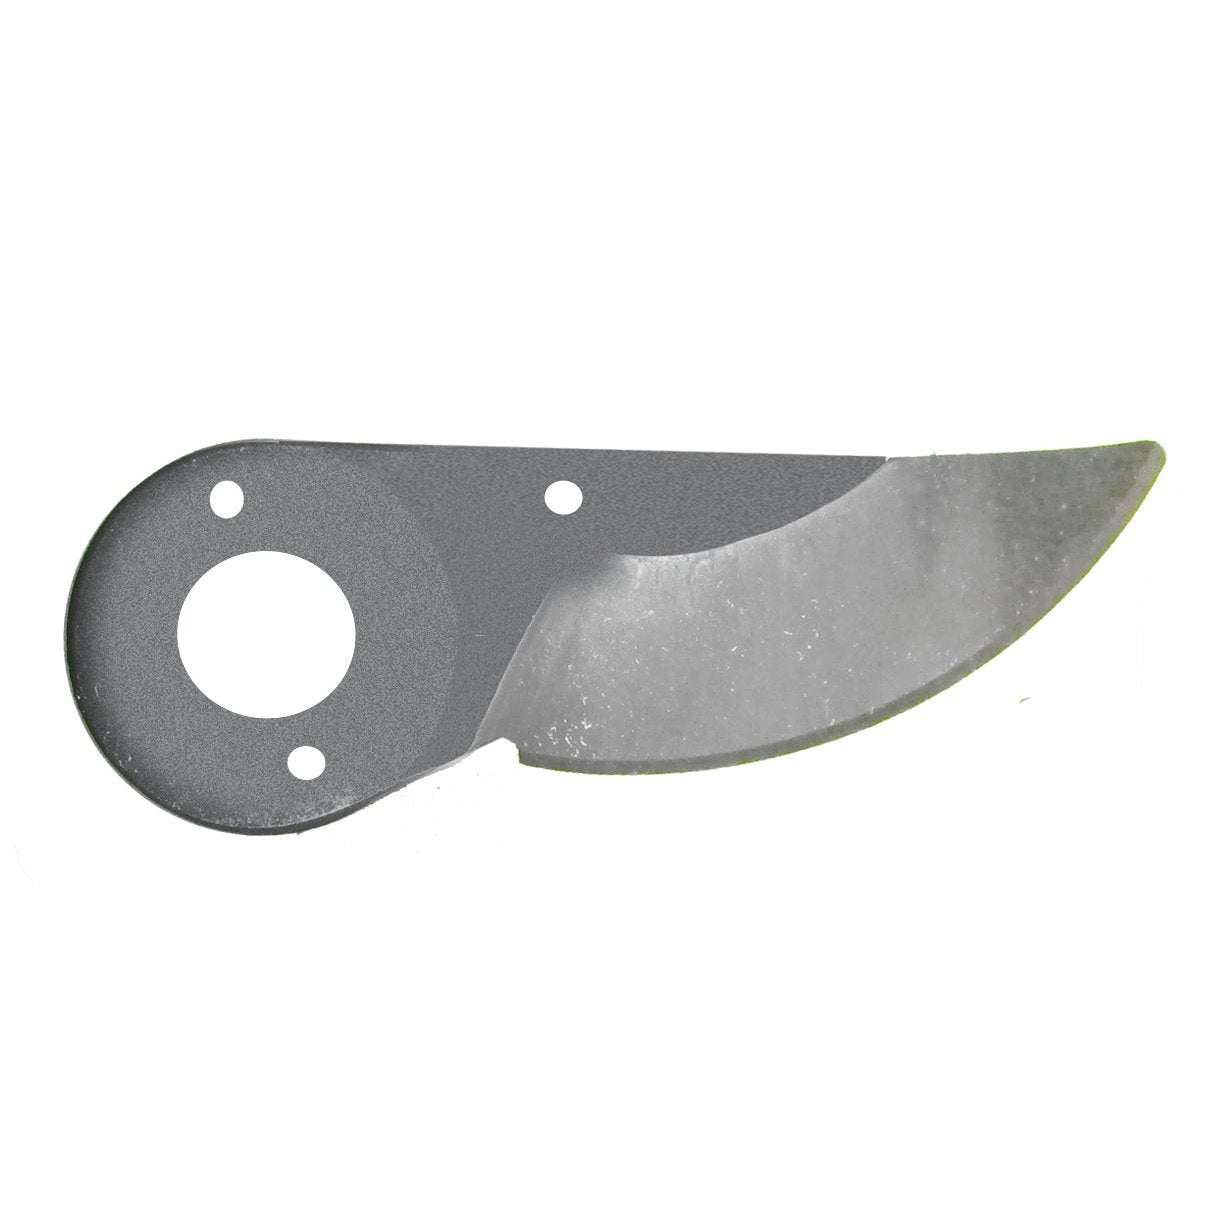 Felco 9/3 Replacement Cutting blade